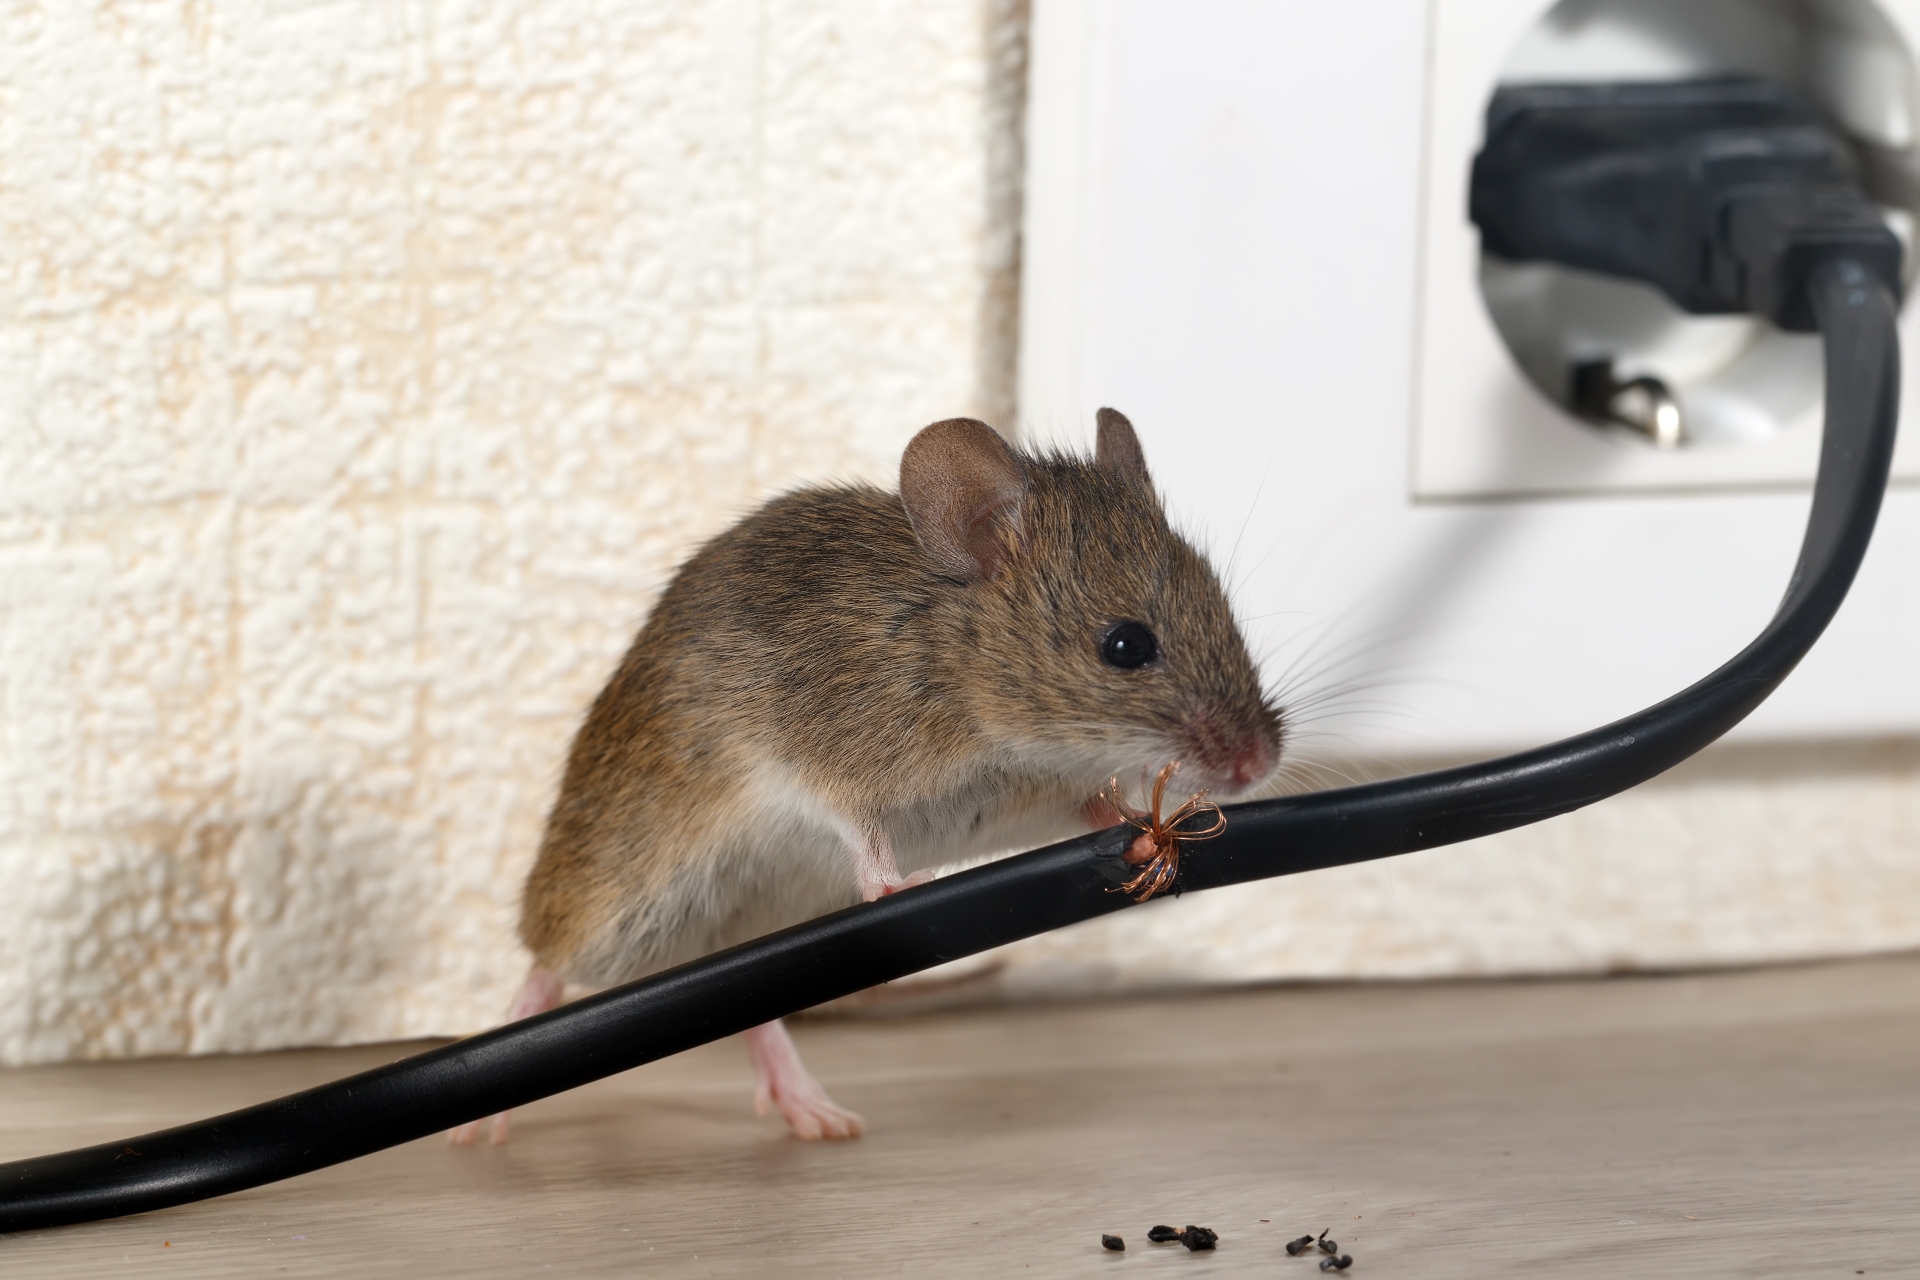 Mice Infestation, Pest Control in Aldgate, Monument, Tower Hill, EC3. Call Now 020 8166 9746